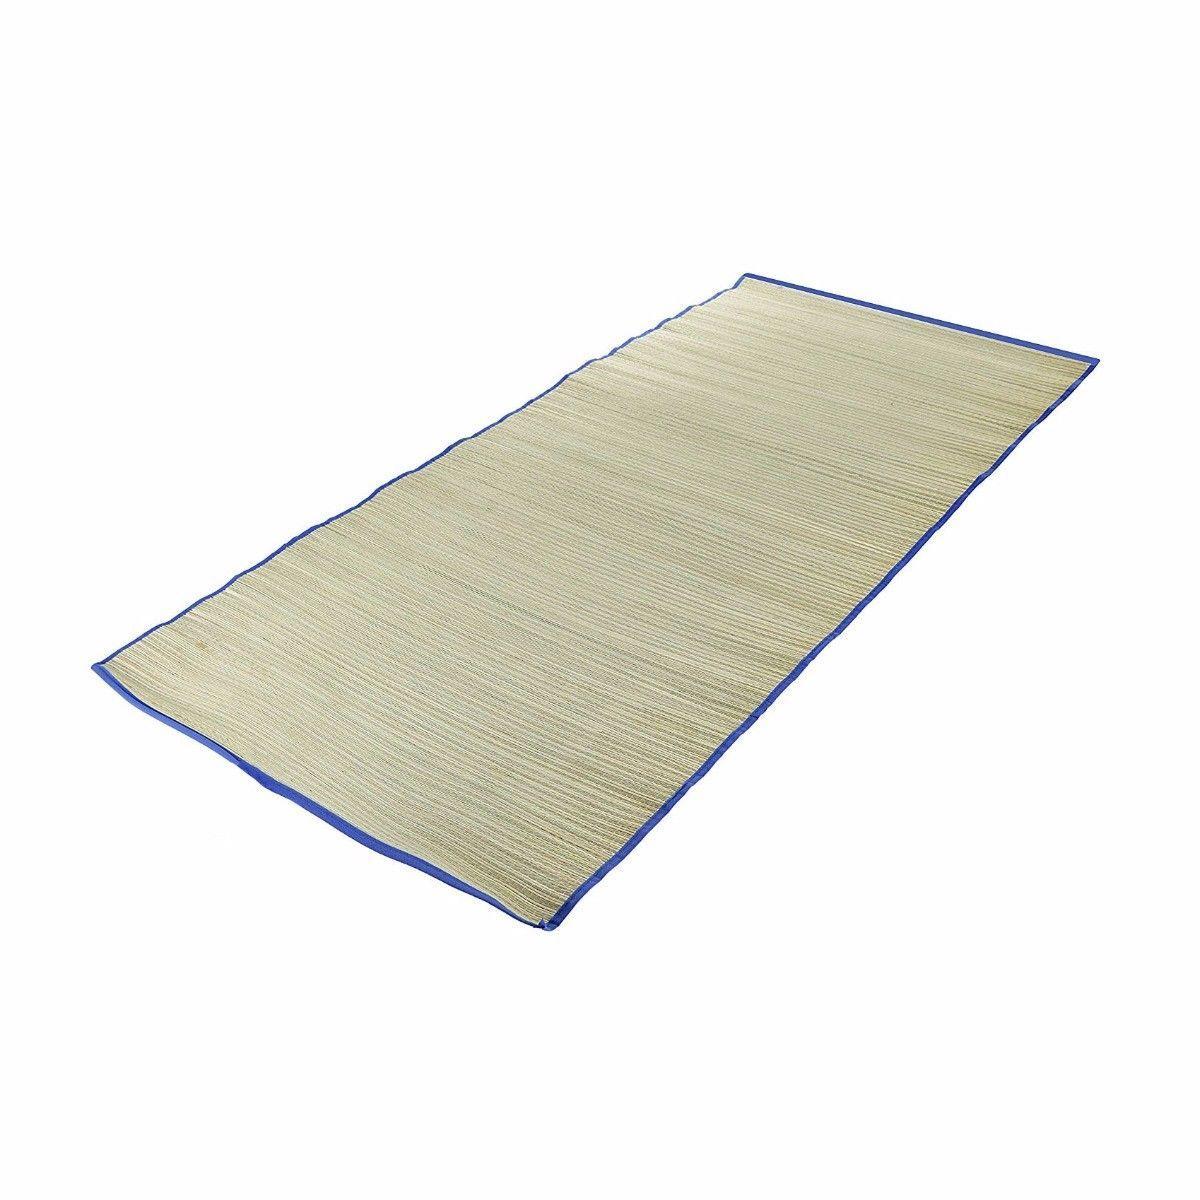 Roll Up Straw Beach Mat Carry Mat Multi Use Traveling Camping 60cm x 70cm  3455 (Parcel Rate)